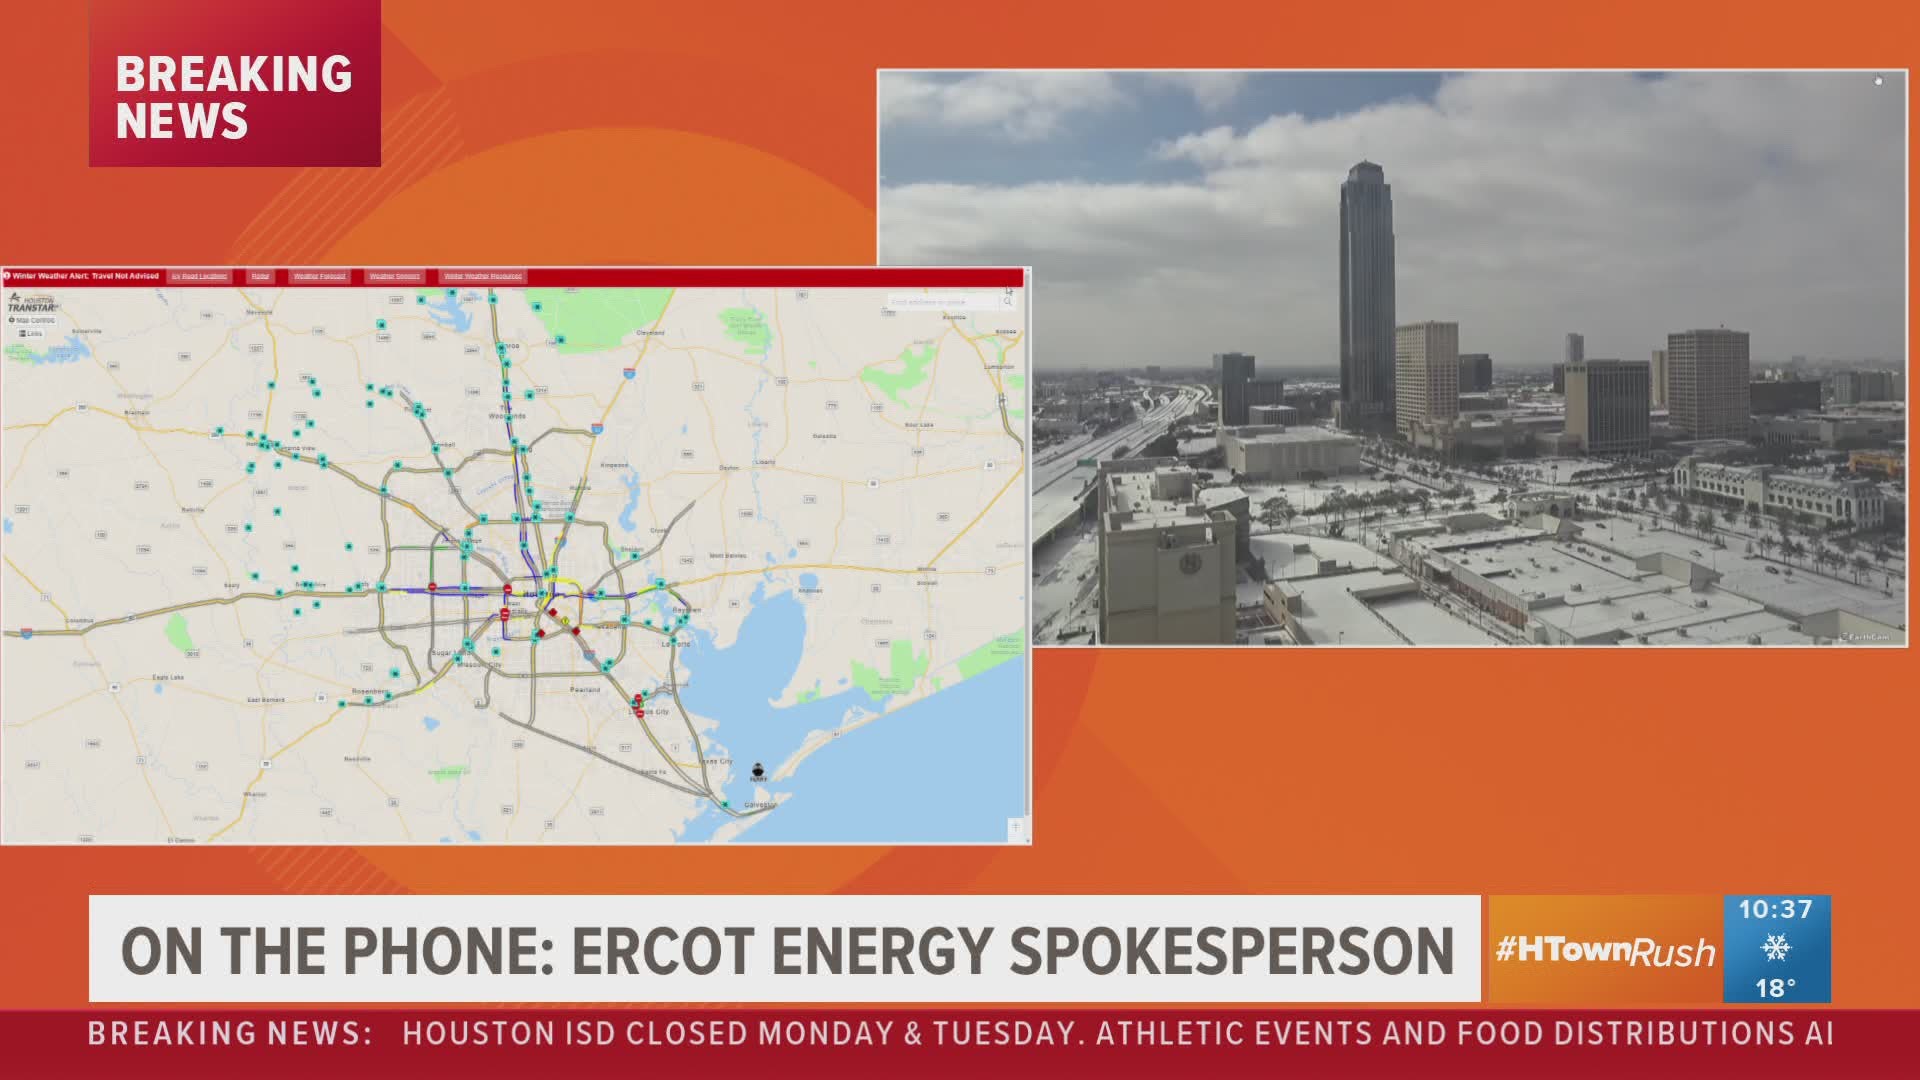 ERCOT gave an update at 10:30 a.m. Feb. 15 on the power outages due to the severe cold weather across Texas.